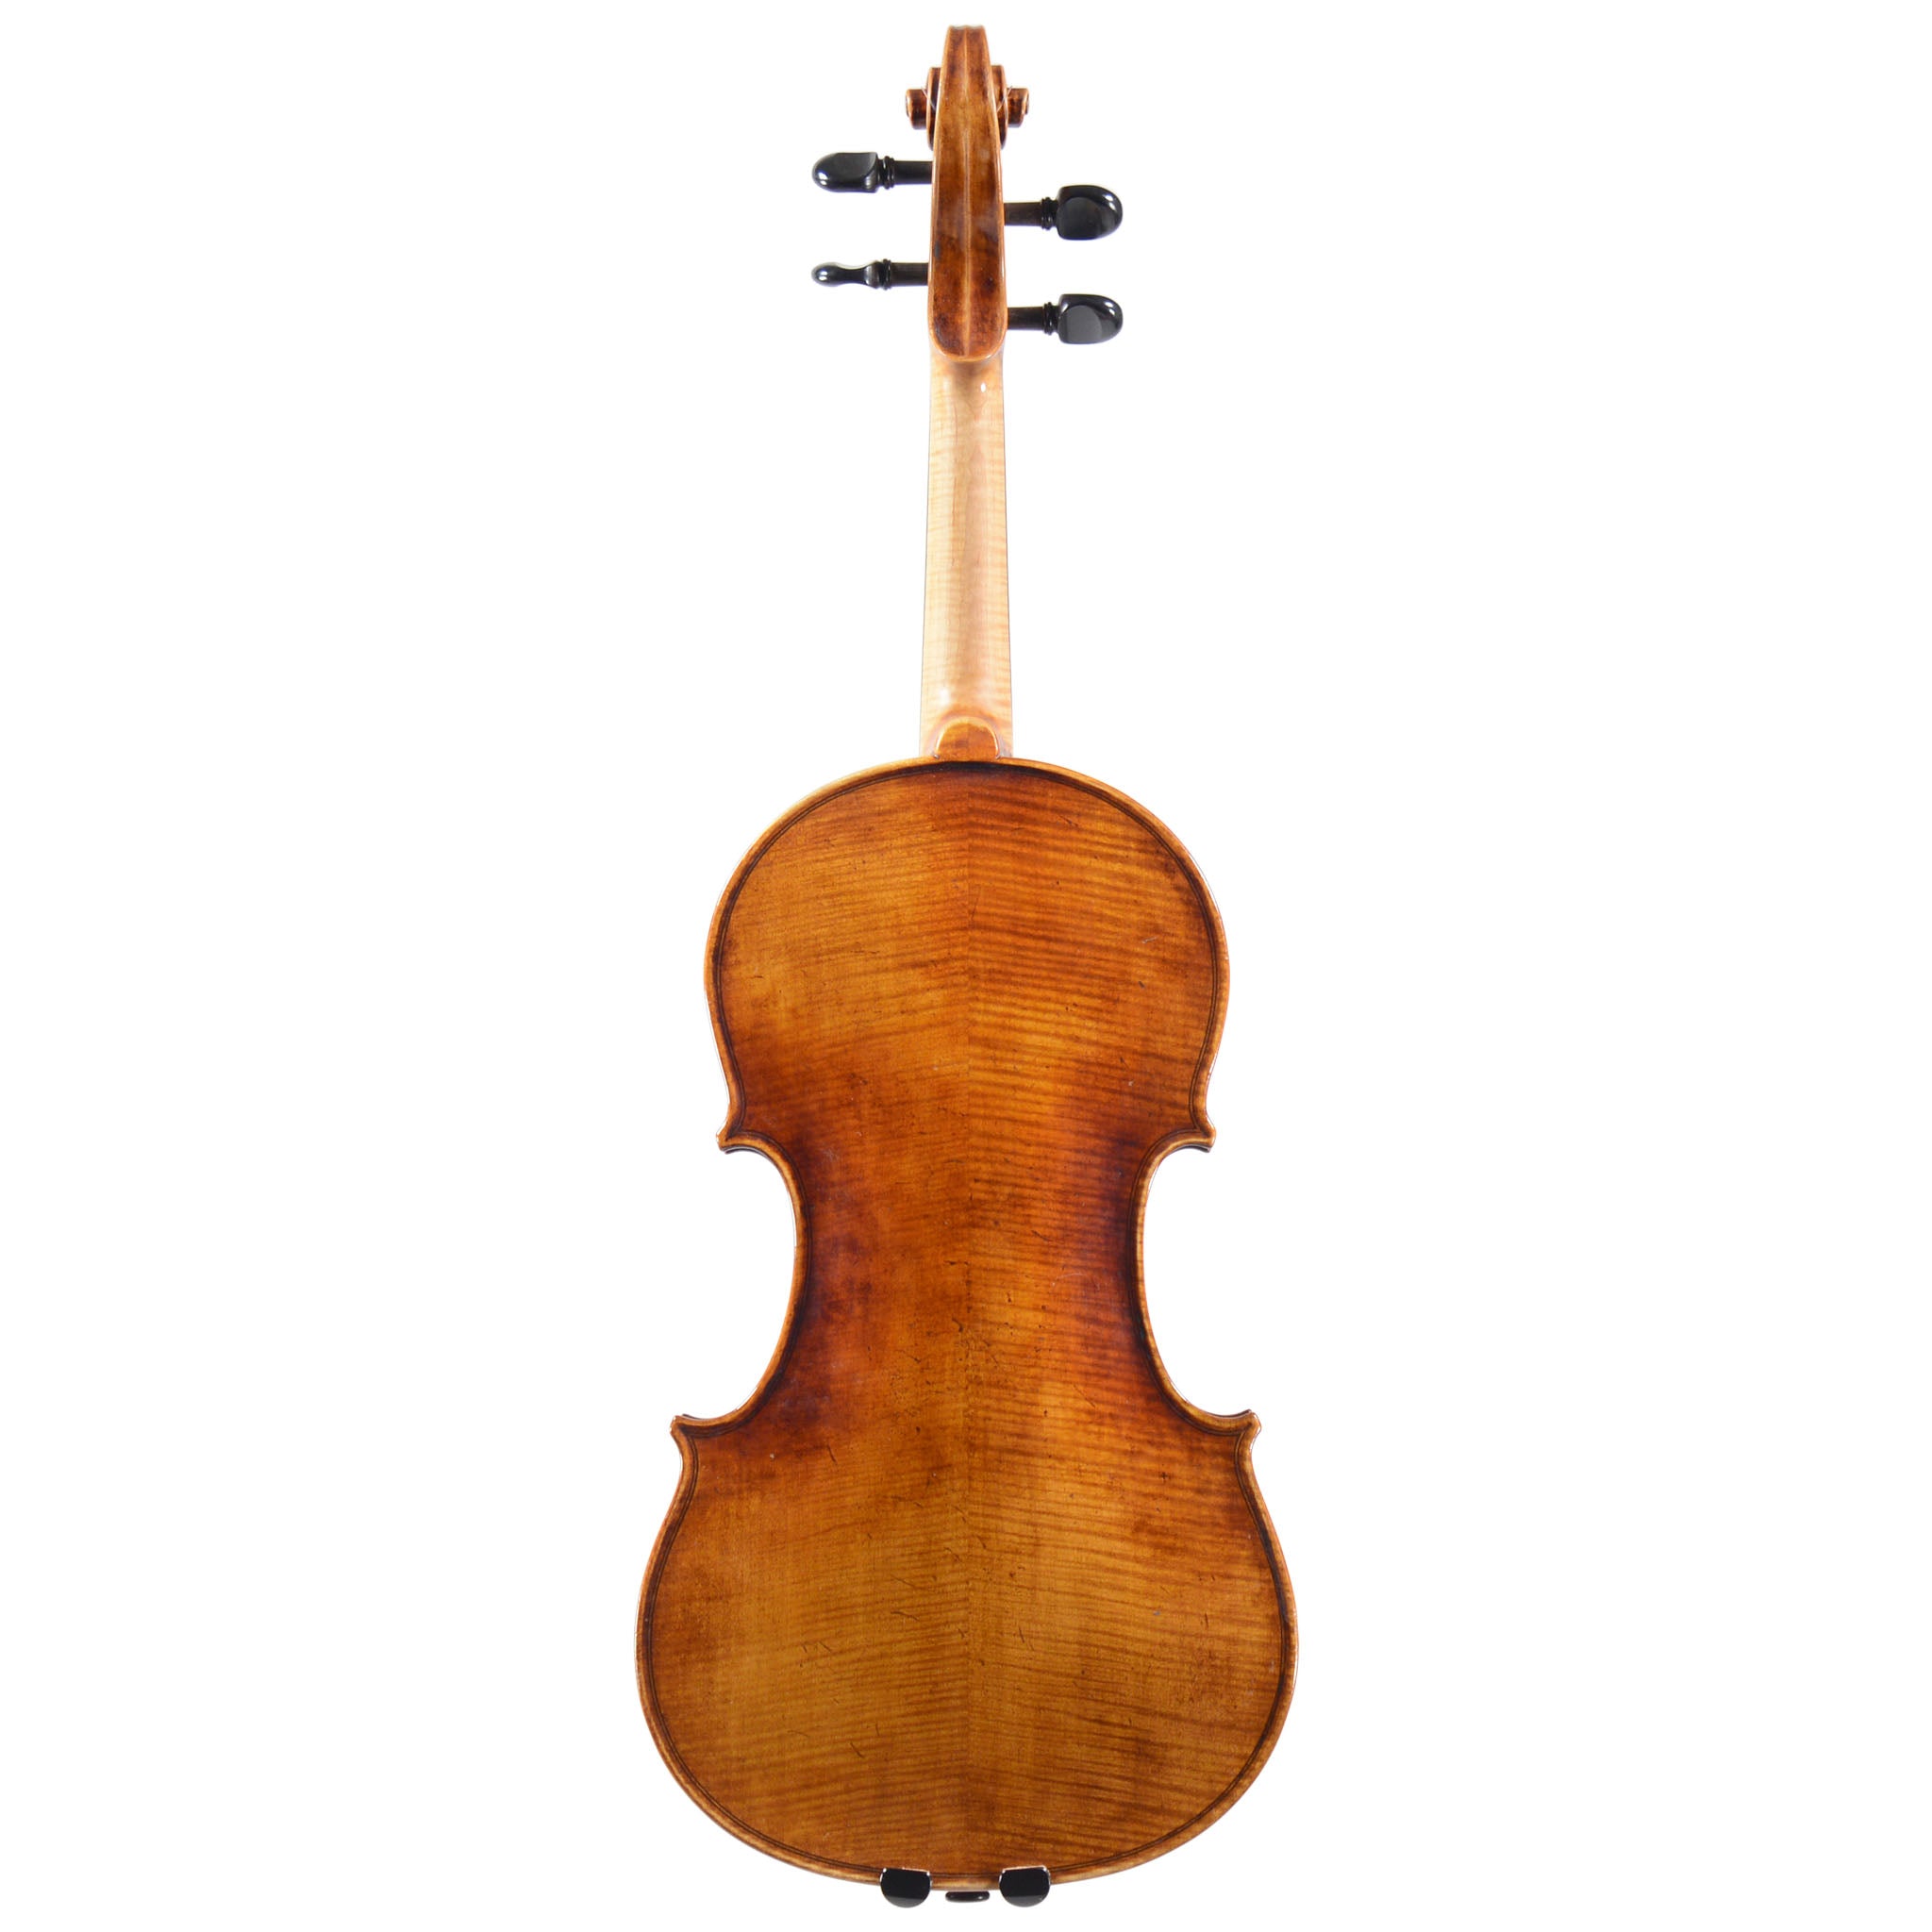 Pre-owned Holstein Bench Cannone 1743 Violin